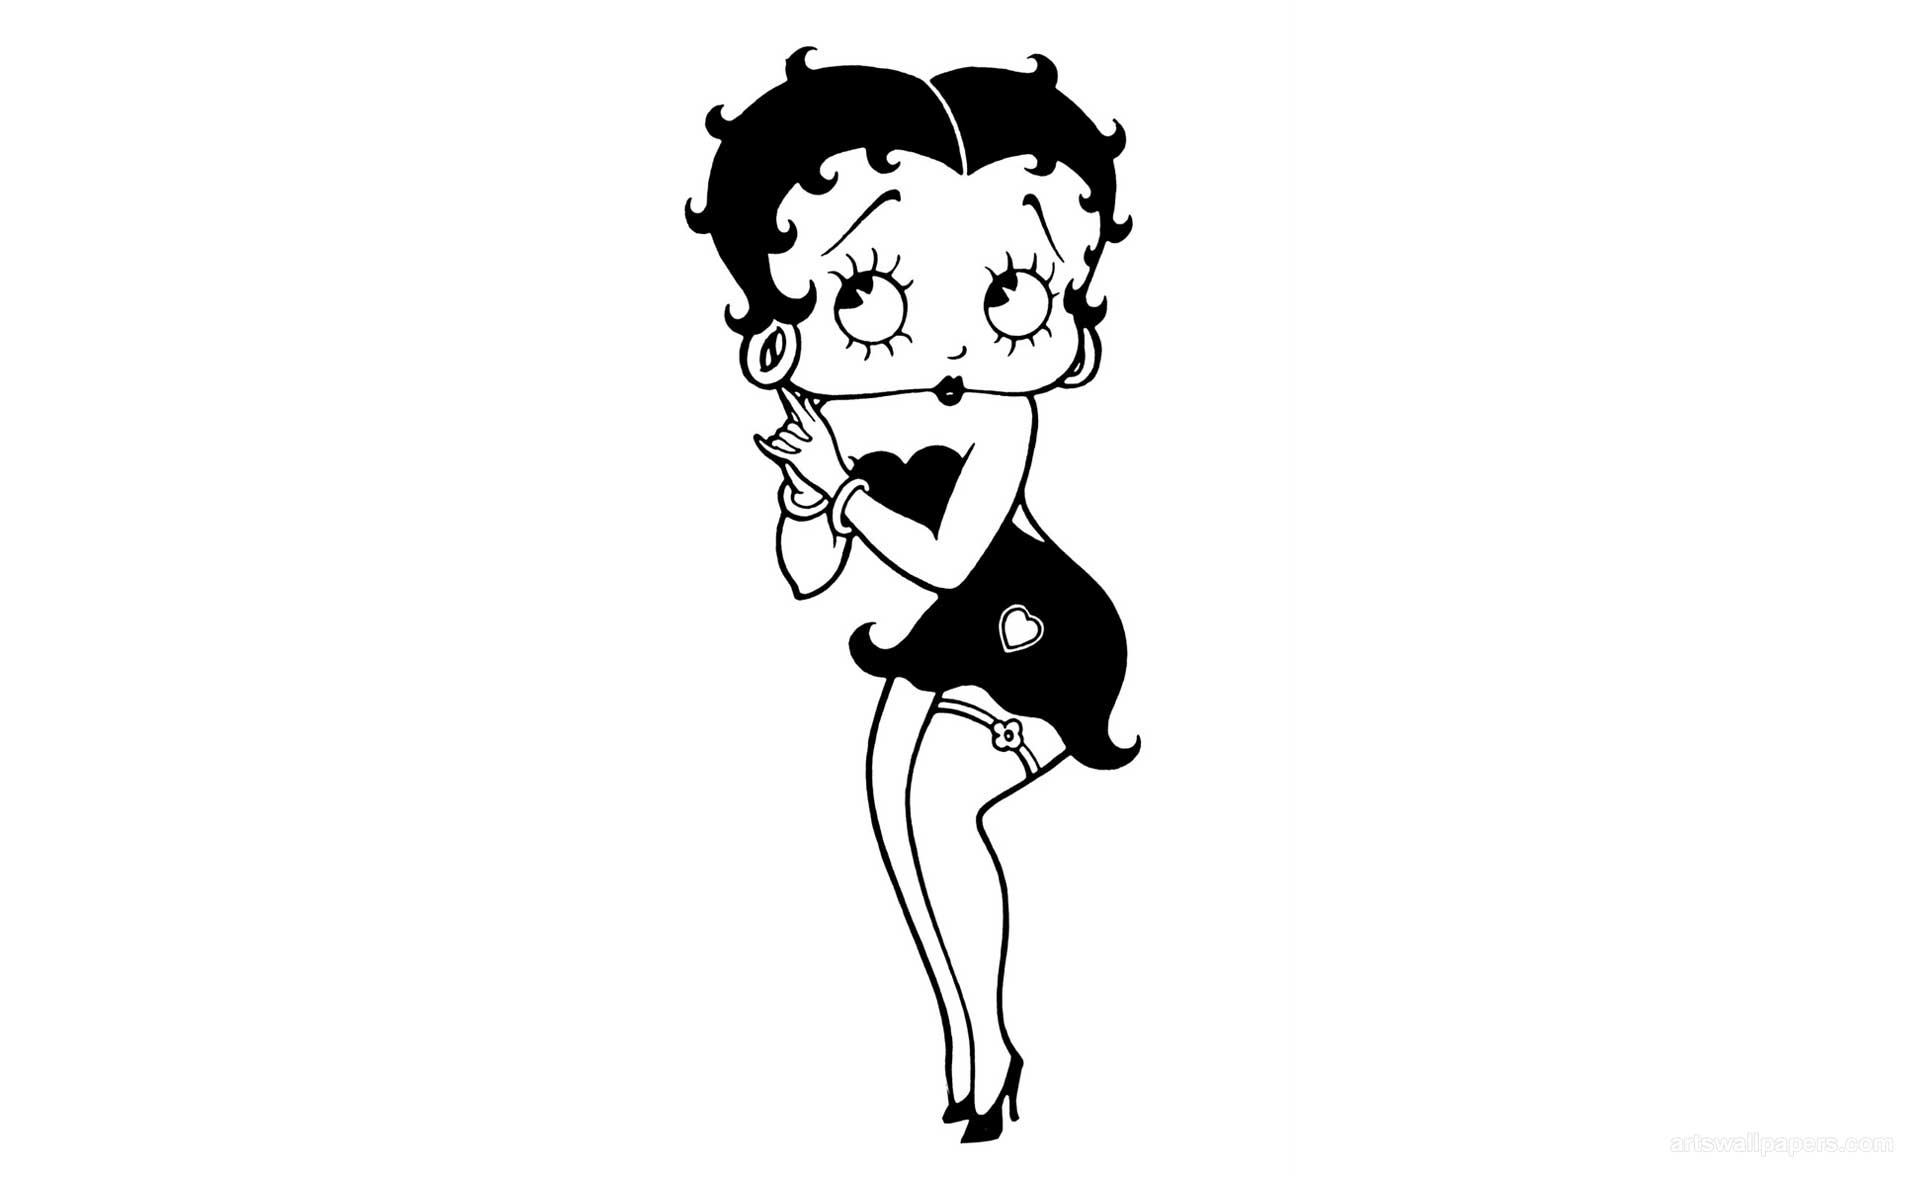 Free Download Betty Boop Wallpapers 19x10 For Your Desktop Mobile Tablet Explore 73 Betty Boop Hd Wallpapers Betty Boop Wallpapers And Screensavers